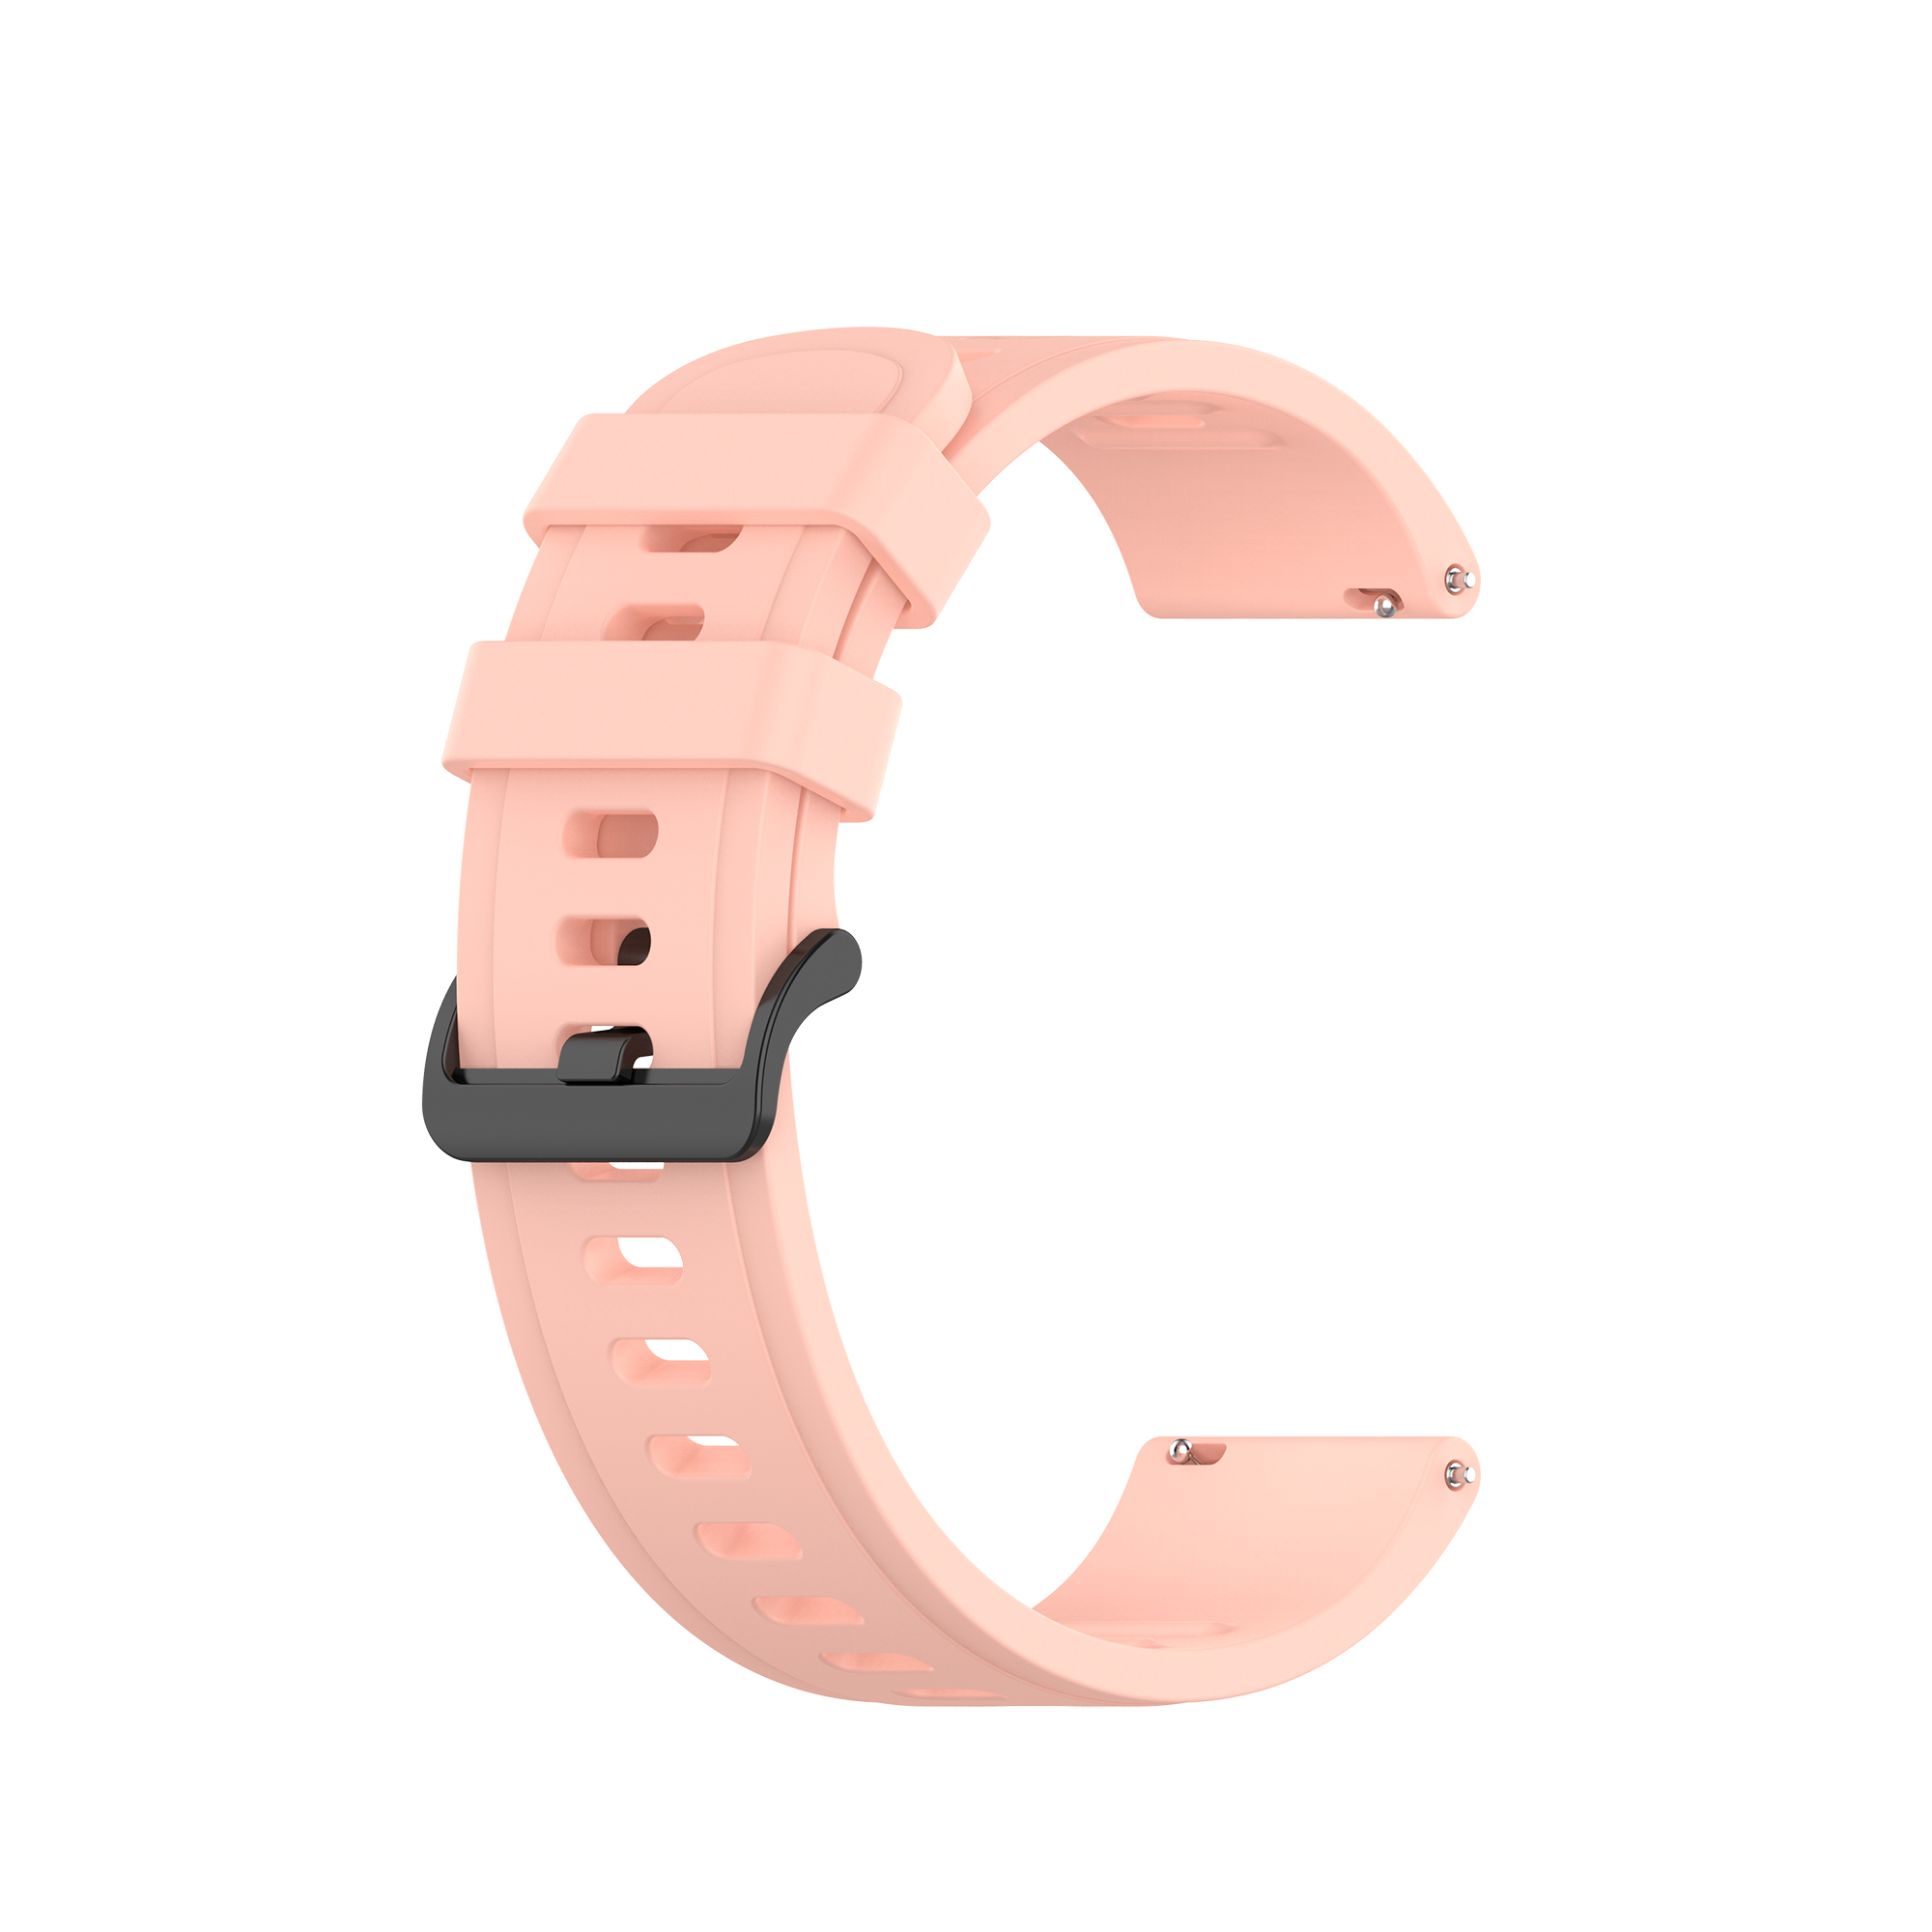 Bakeey-2022mm-Pure-Color-Sweatproof-Soft-Silicone-Watch-Band-Strap-Replacement-for-Garmin-Vivowatch-1773645-18